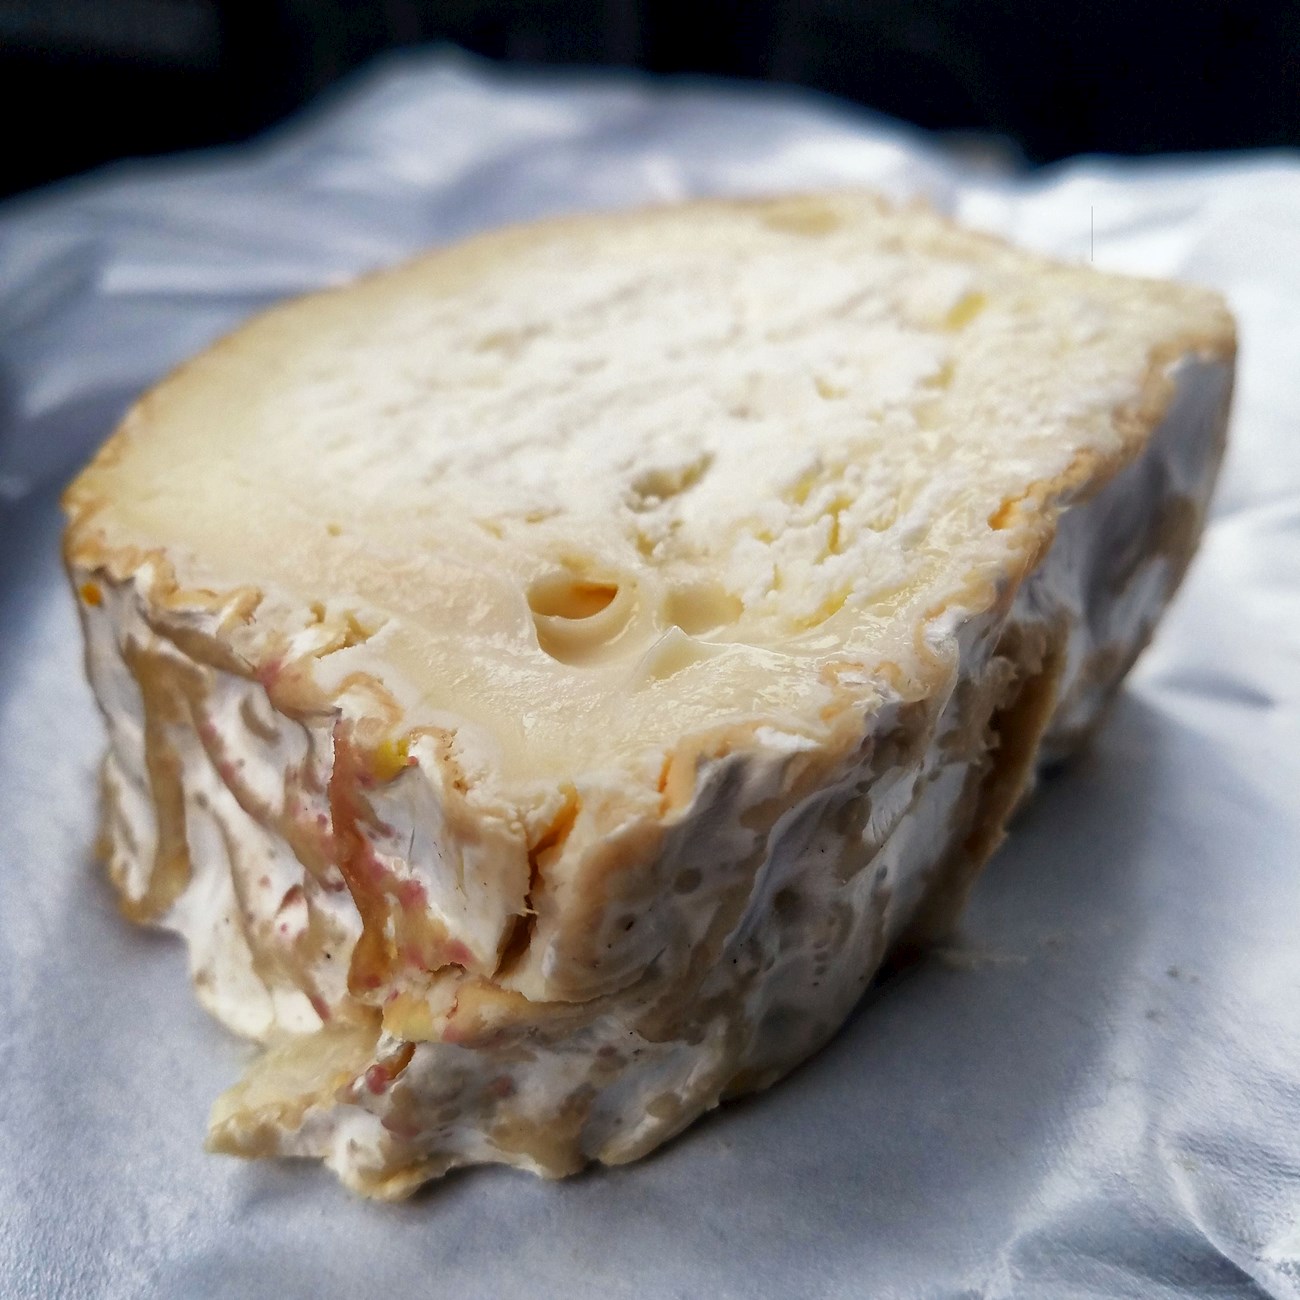 5 Best Rated Centrien Goat's Milk Cheeses